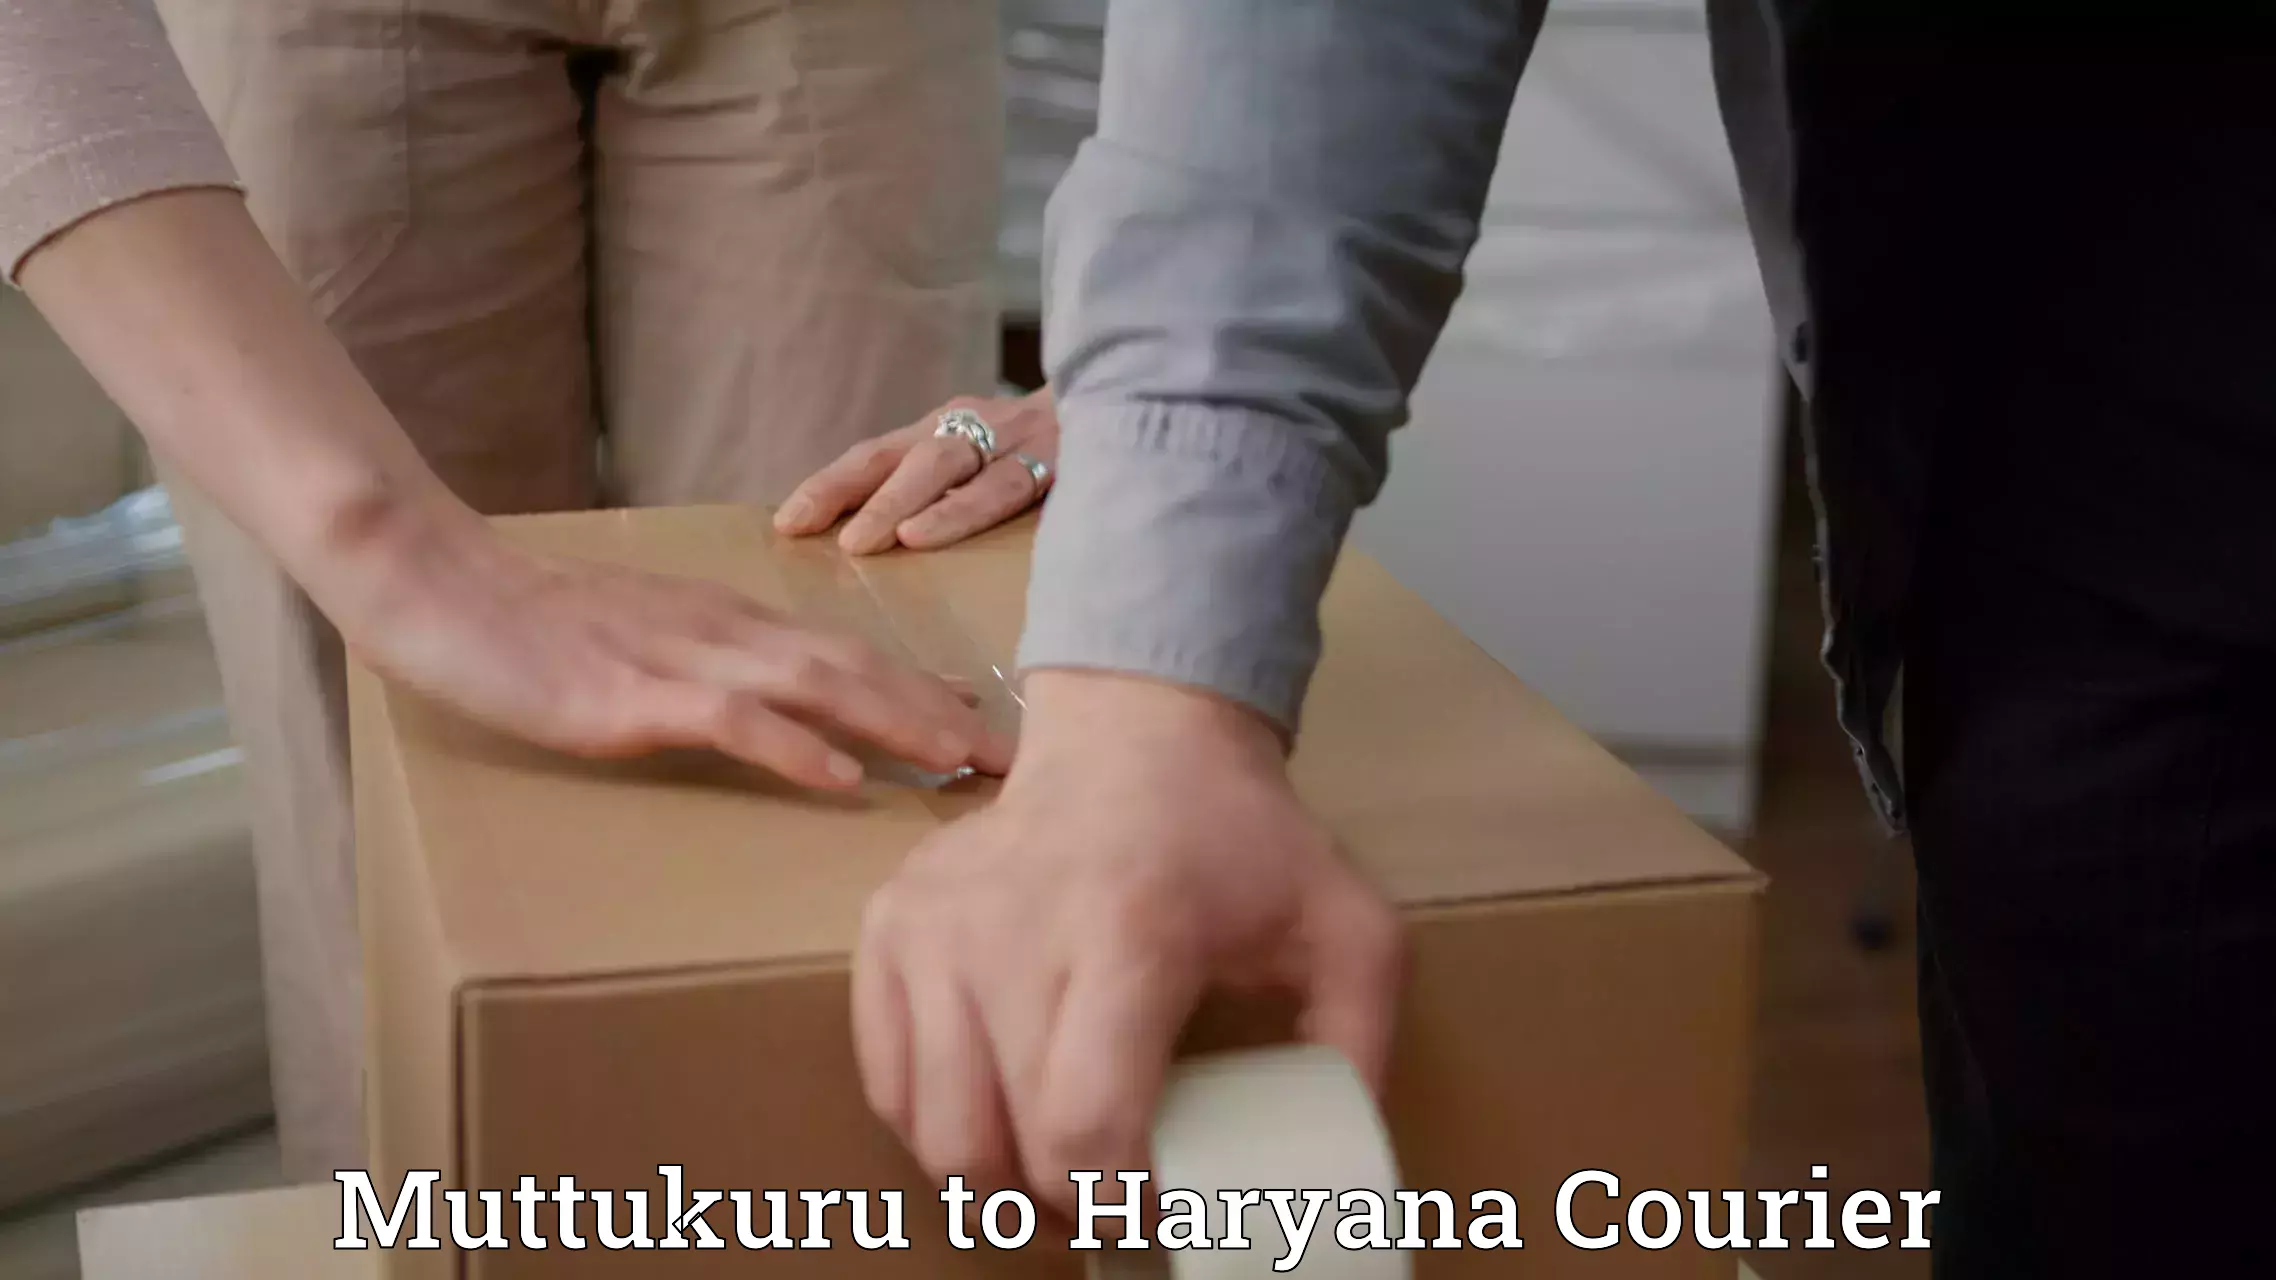 Personal courier services in Muttukuru to Haryana